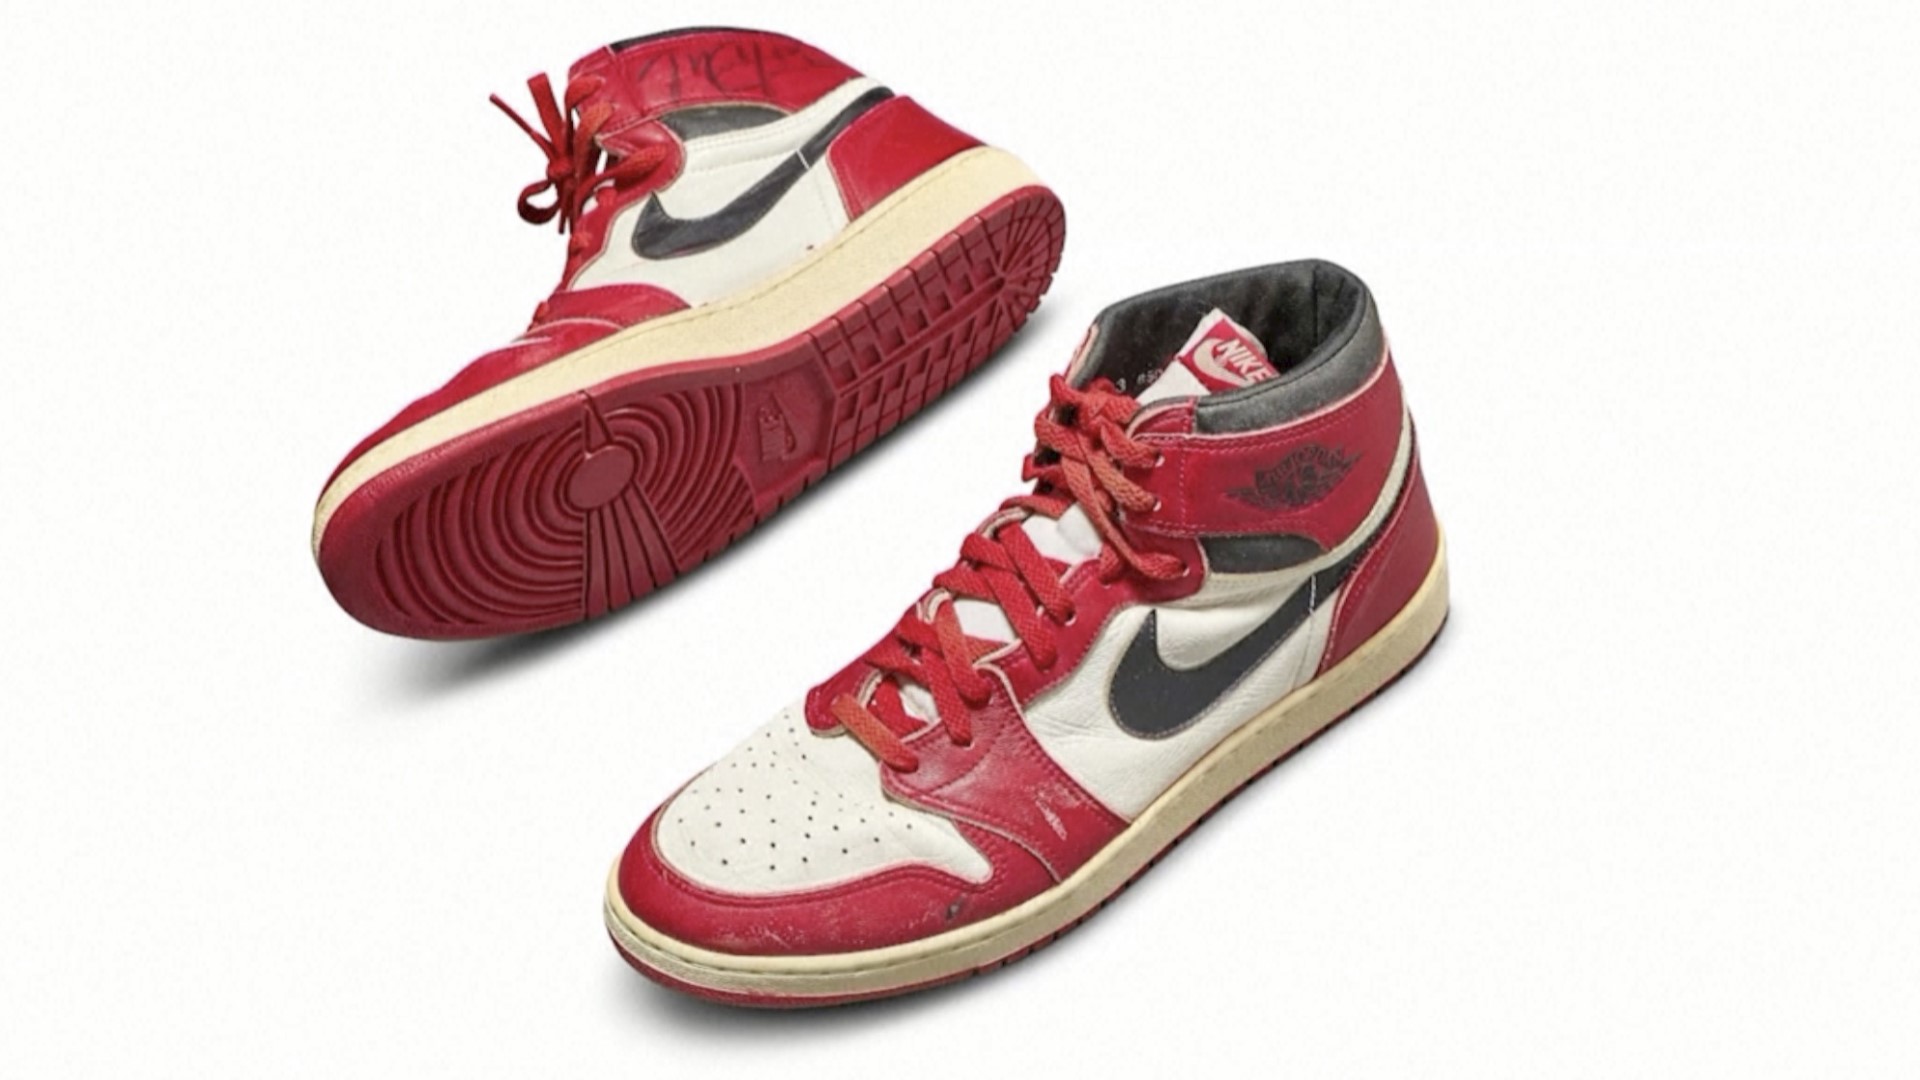 An autographed pair of the NBA great's first Nike Air Jordans is going under the hammer.